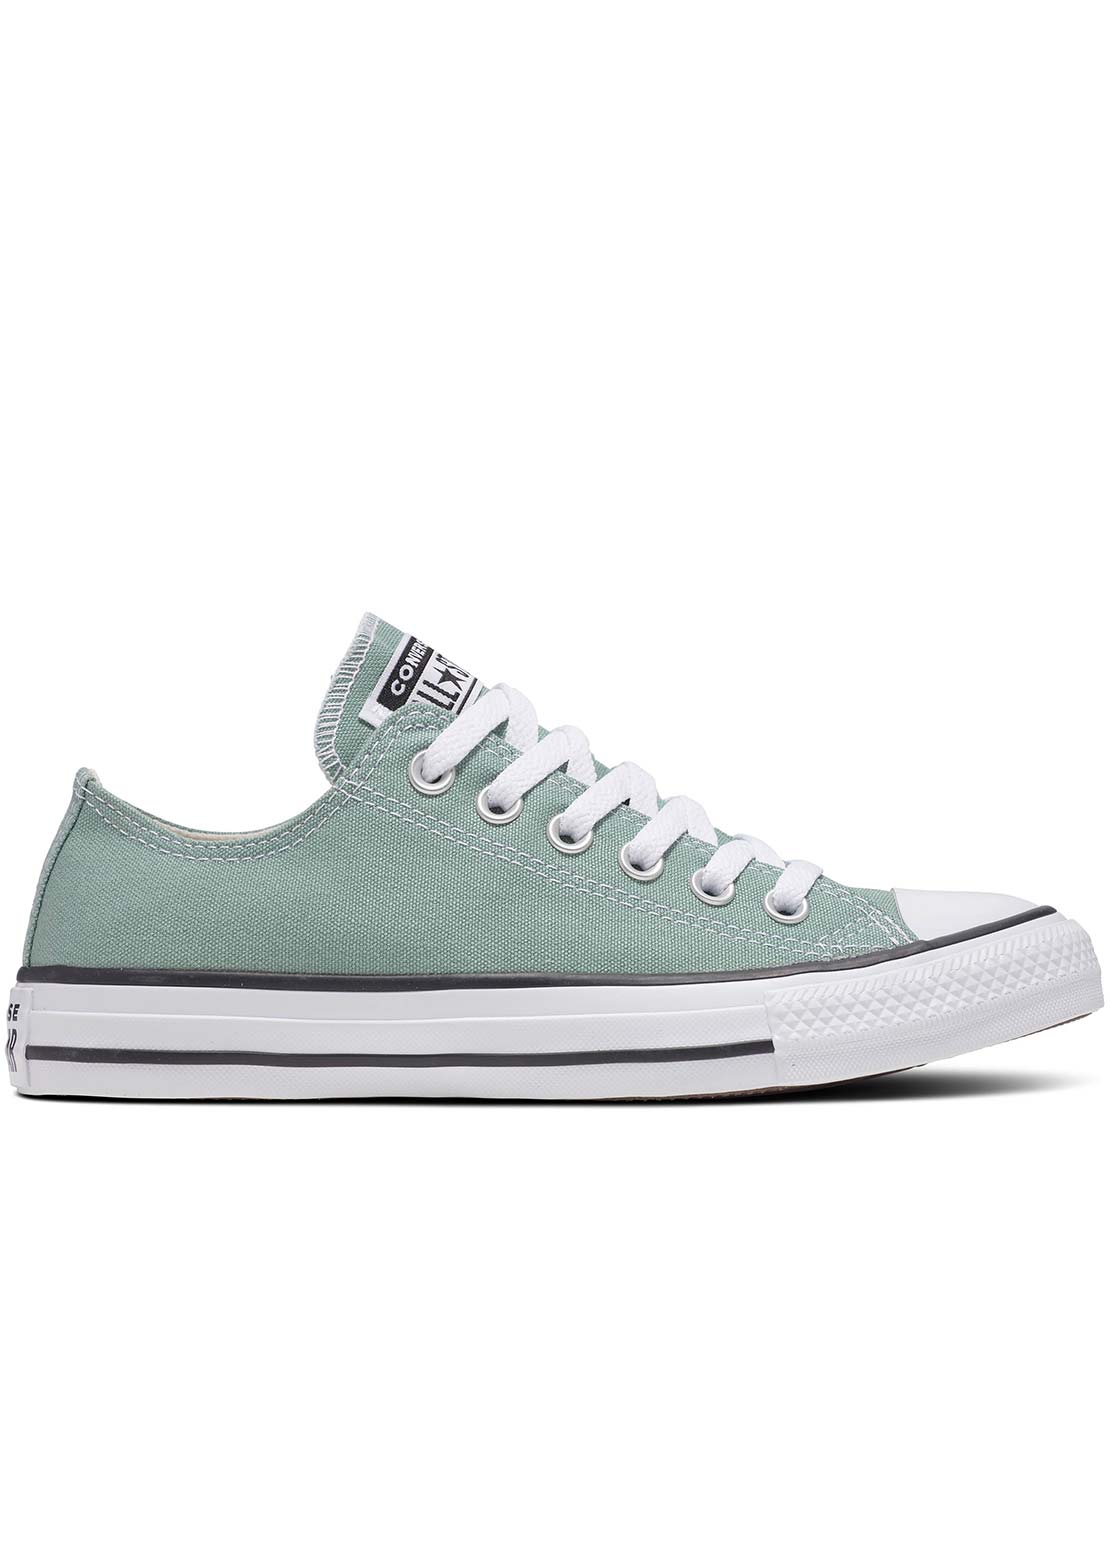 Converse Unisex Chuck Taylor All Star Low Top Shoes Herby